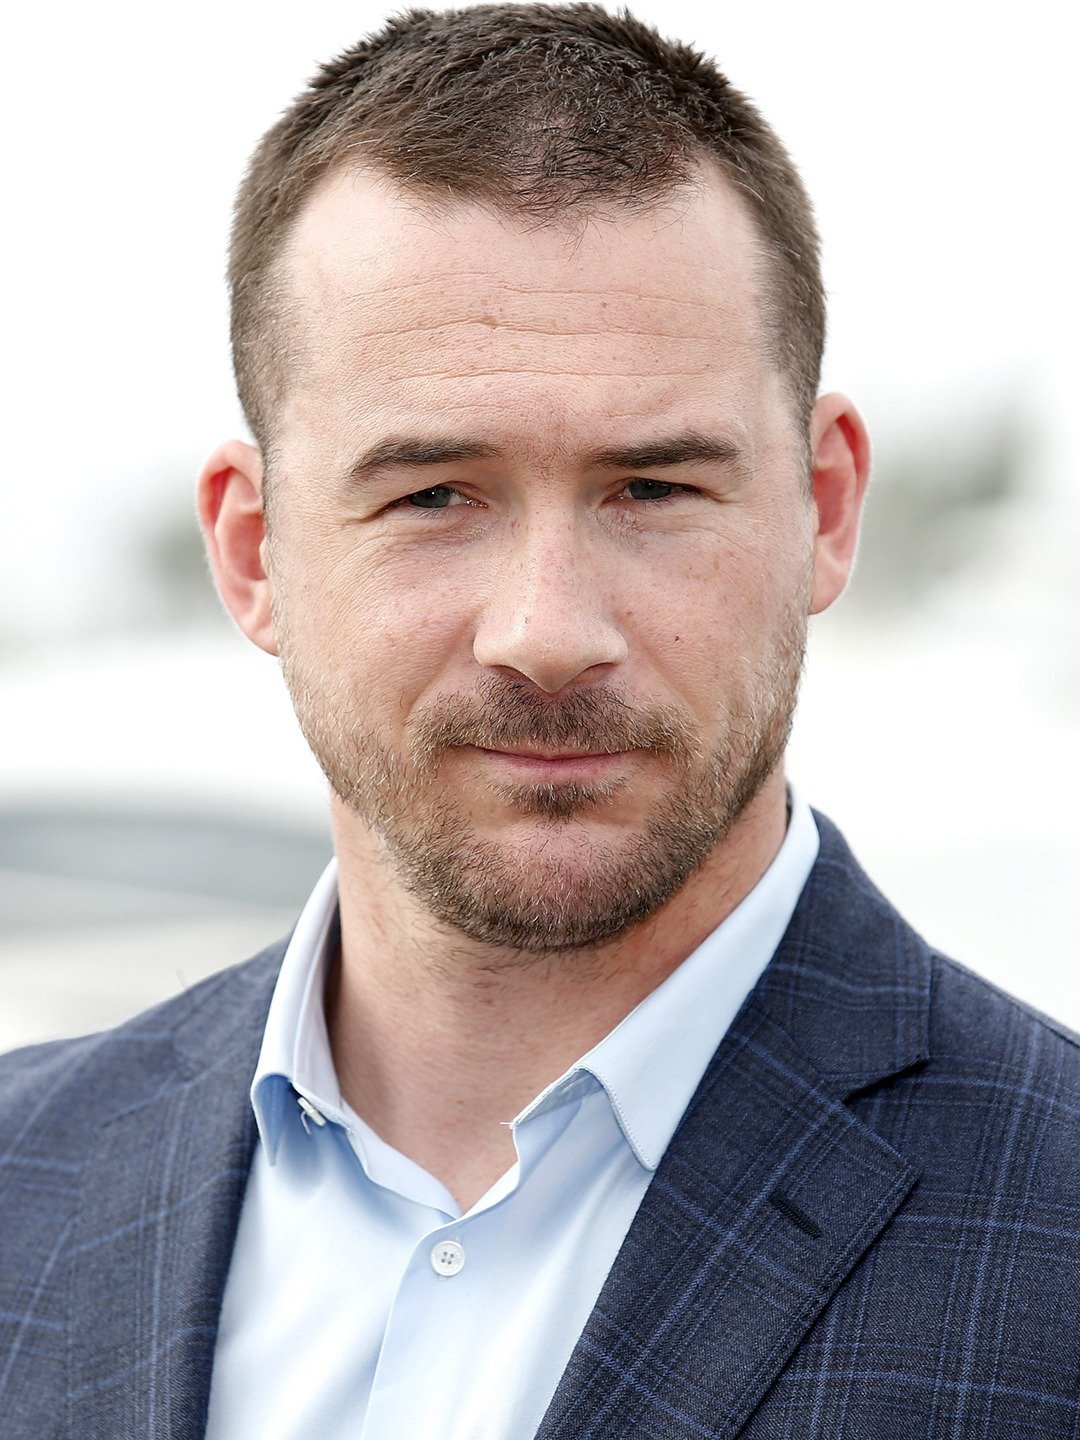 How tall is Barry Sloane?